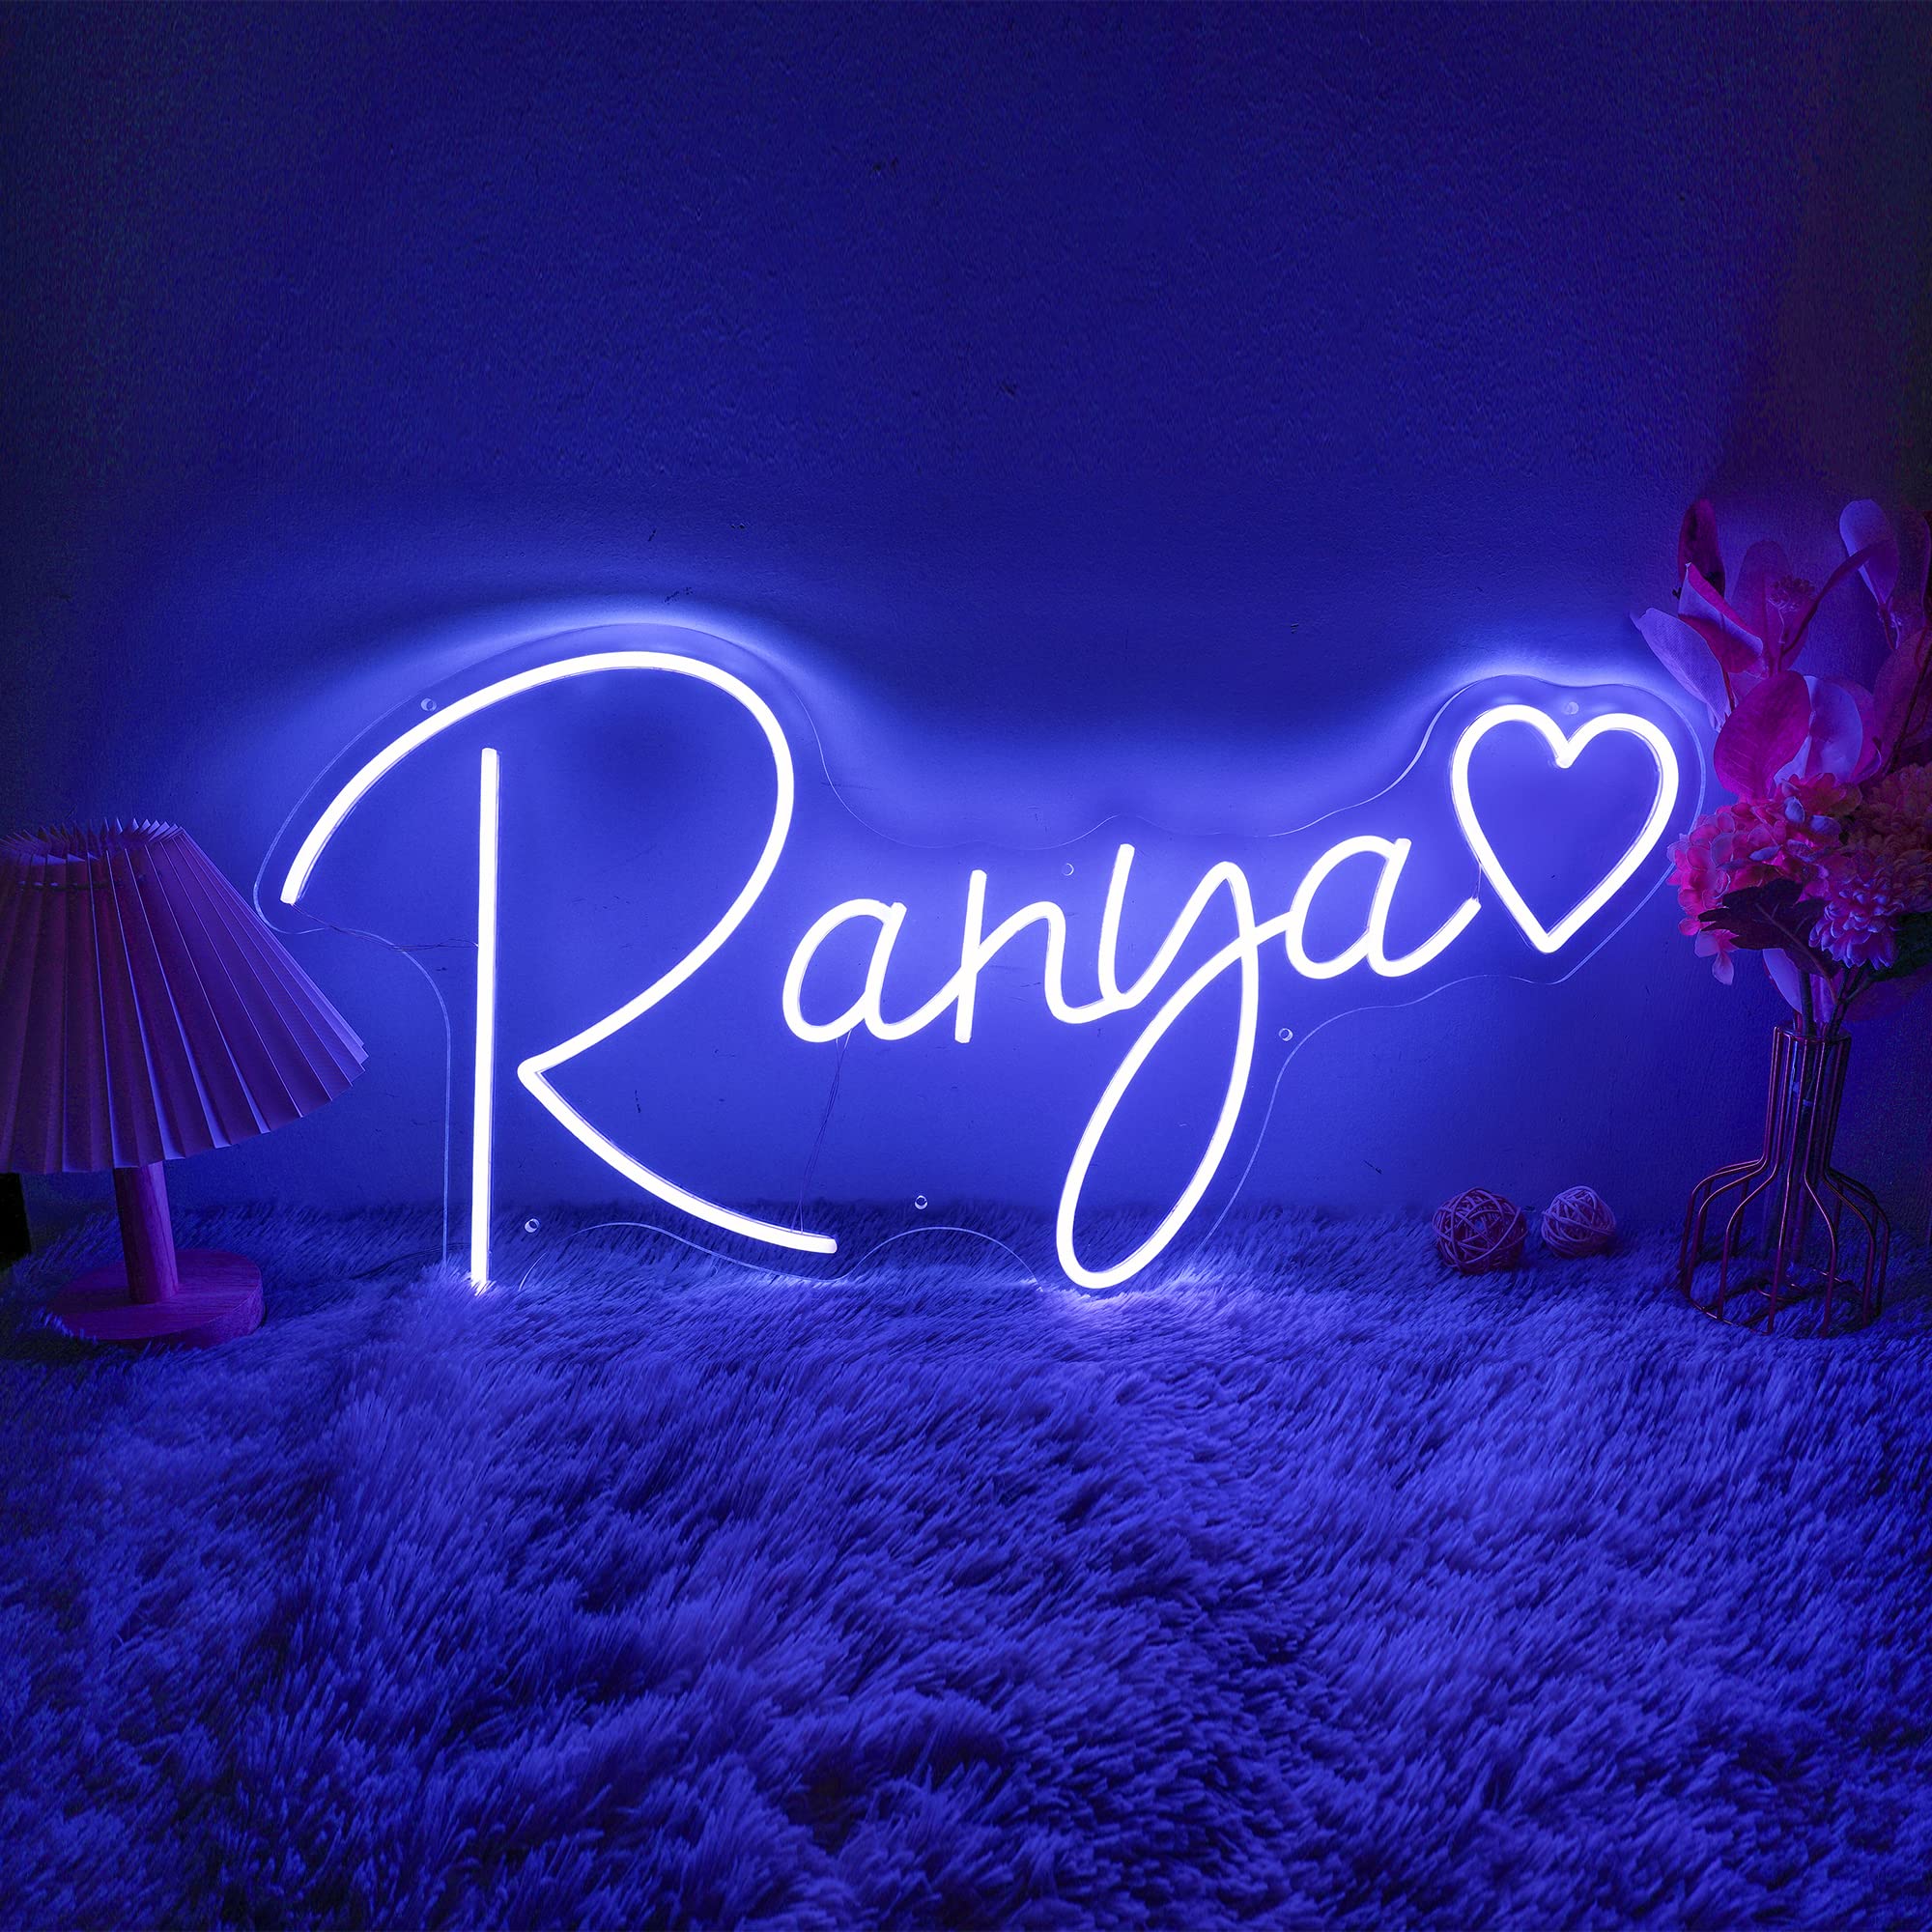 NEONIP-Personalized 100% Handmade LED Neon Sign with Your Name